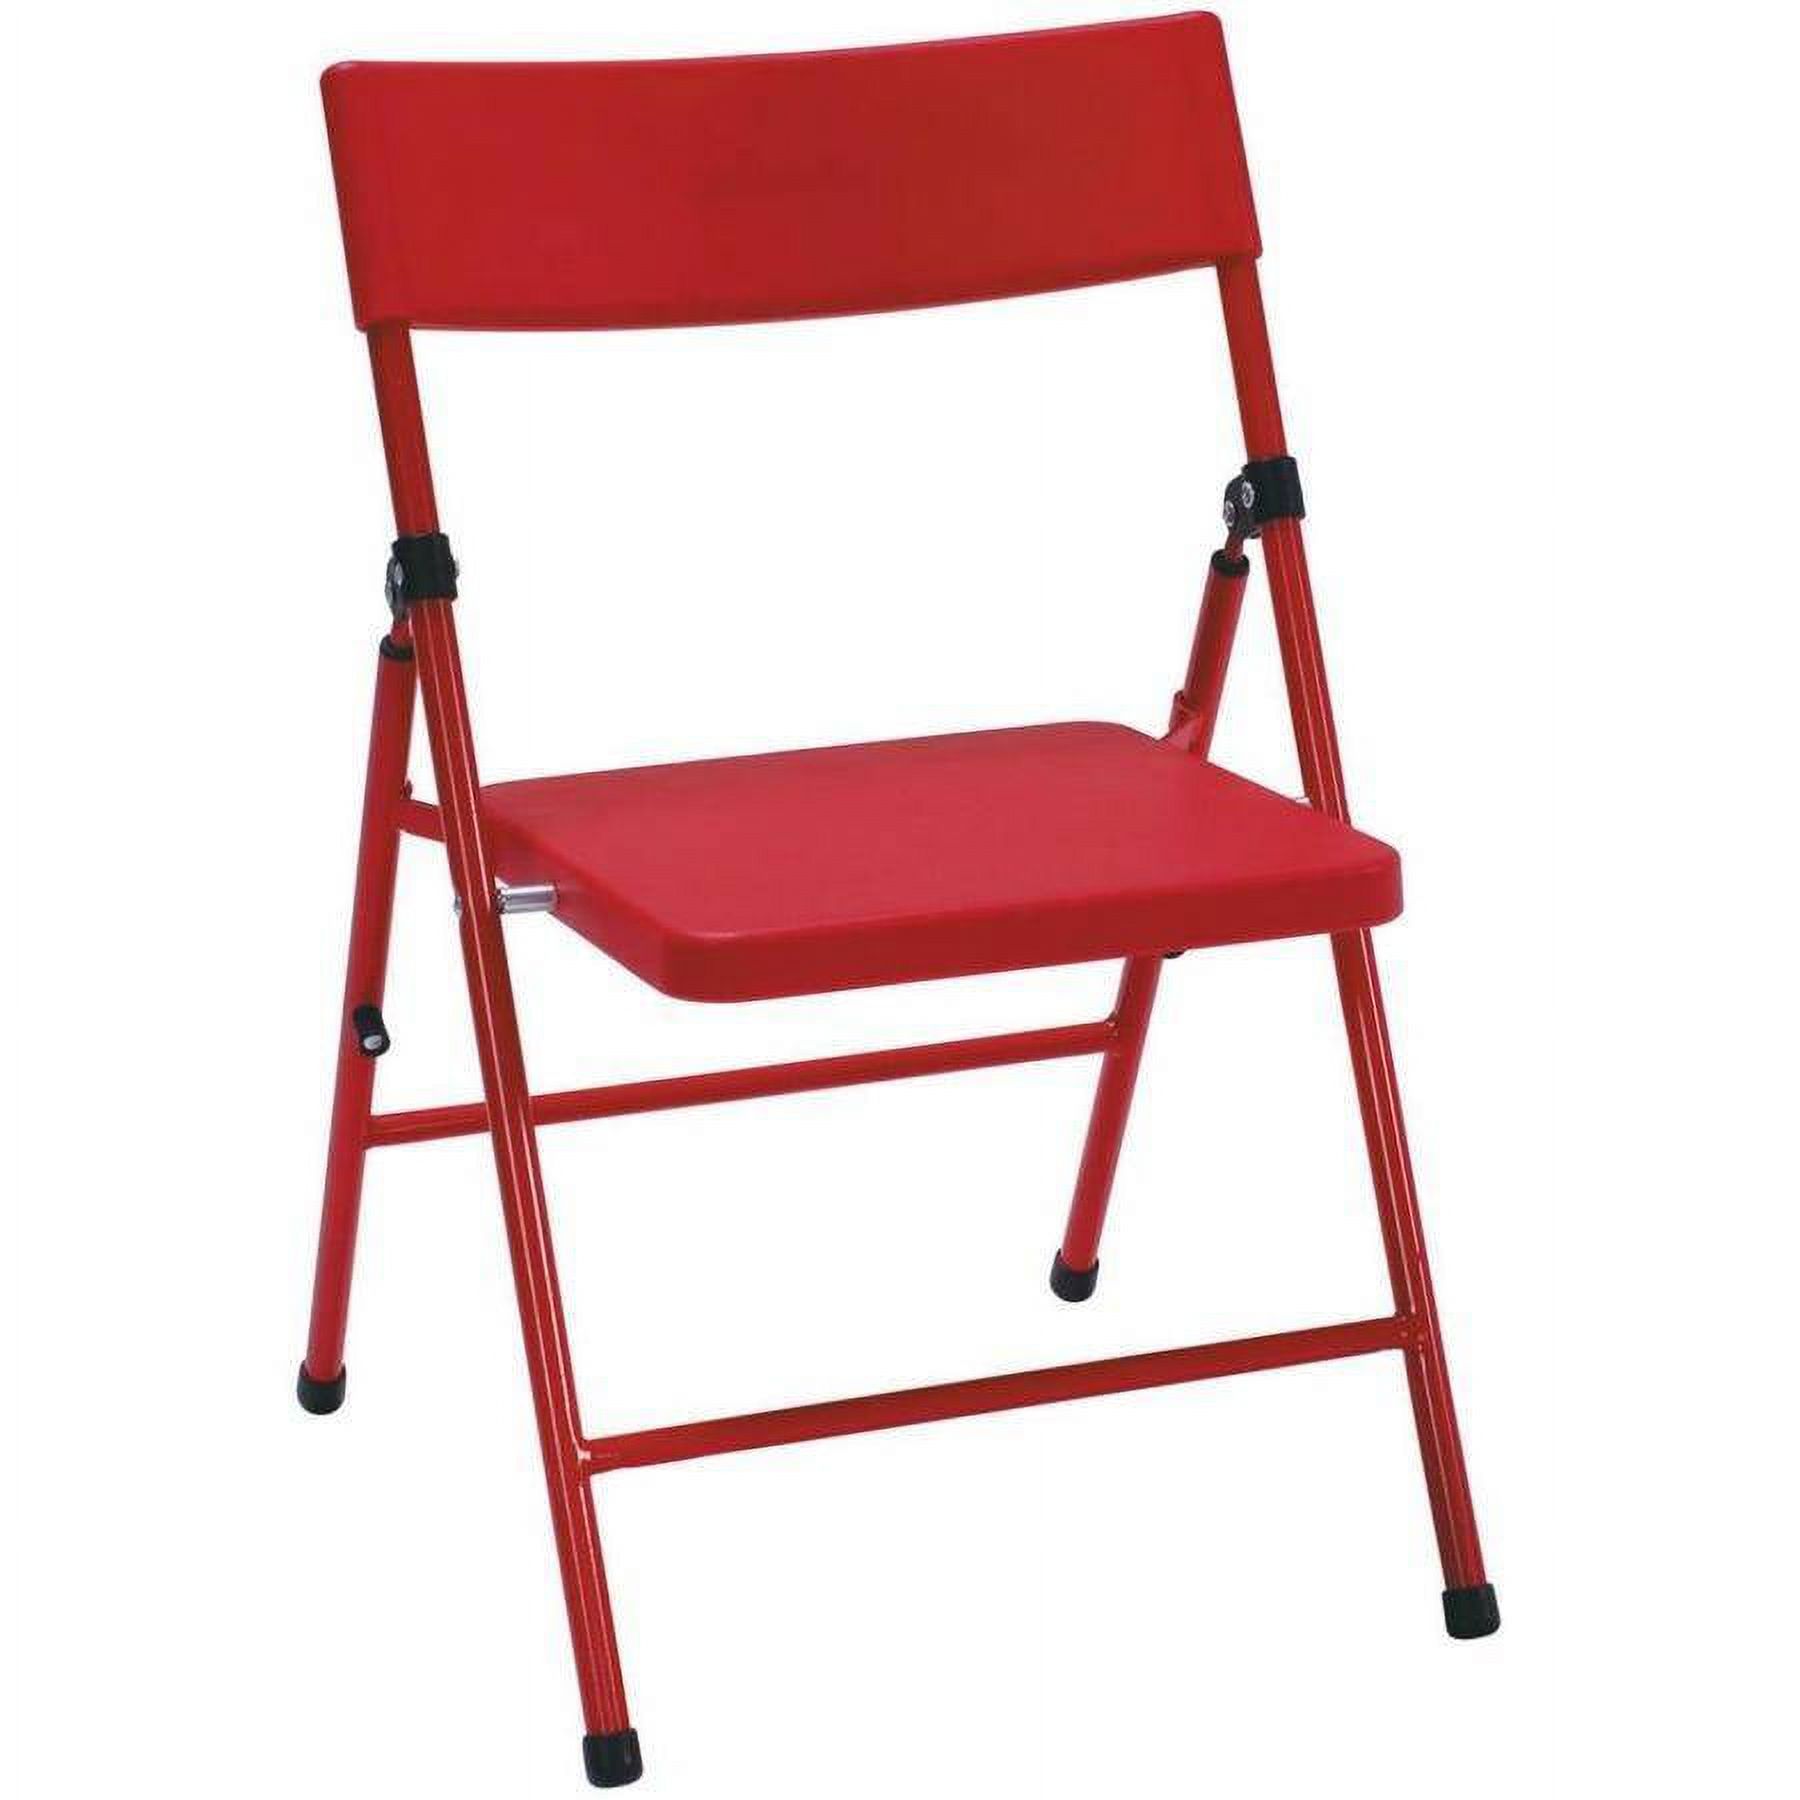 Safety 1st Children's Pinch-free Chairs - Set of 4, Multiple Colors - image 2 of 6